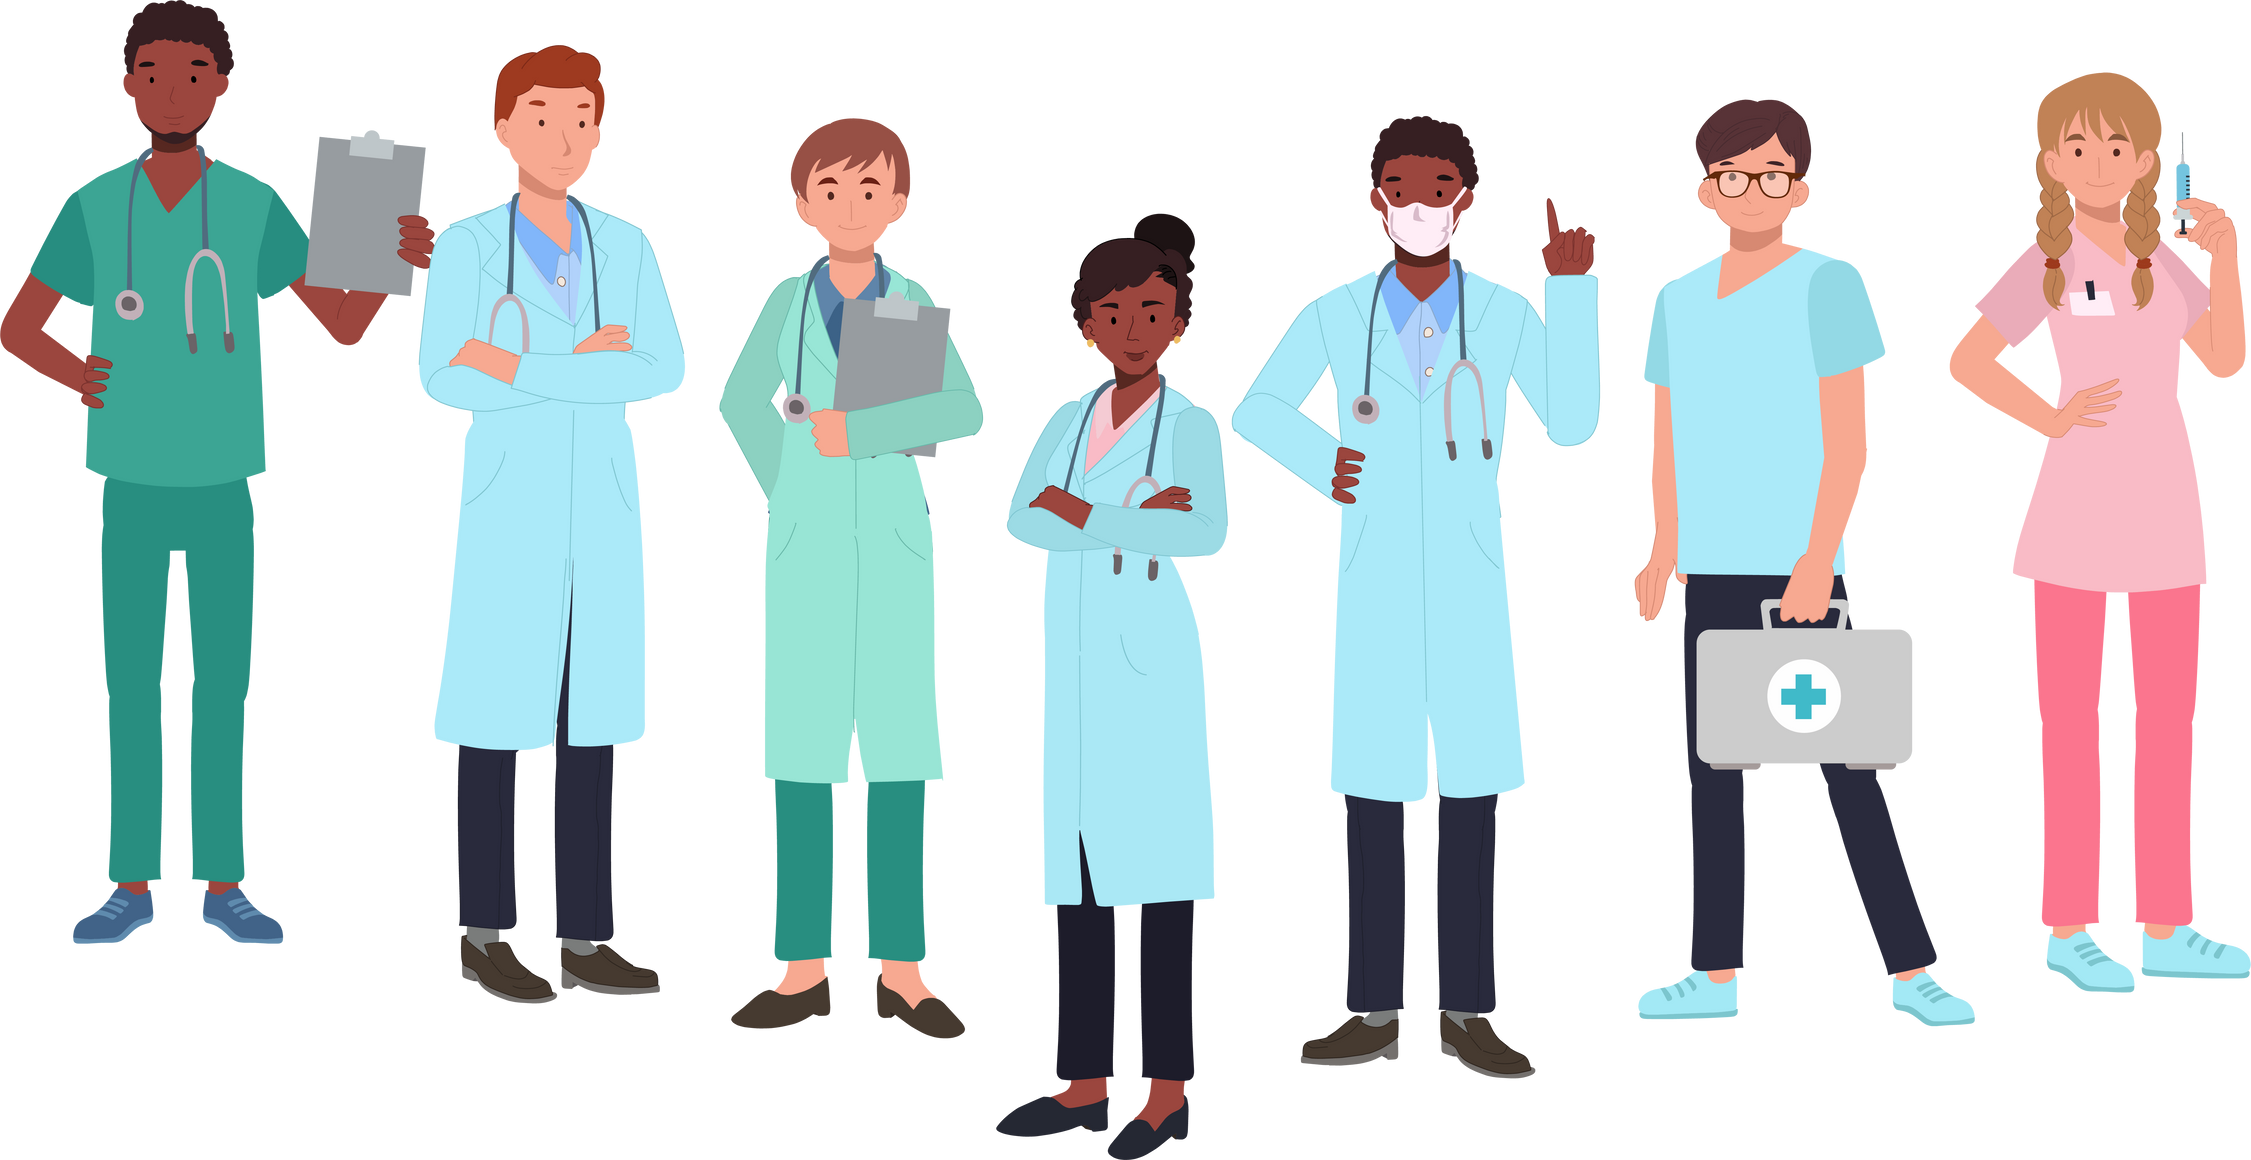 Medical staff team concept. A team of doctors in uniform standing together.